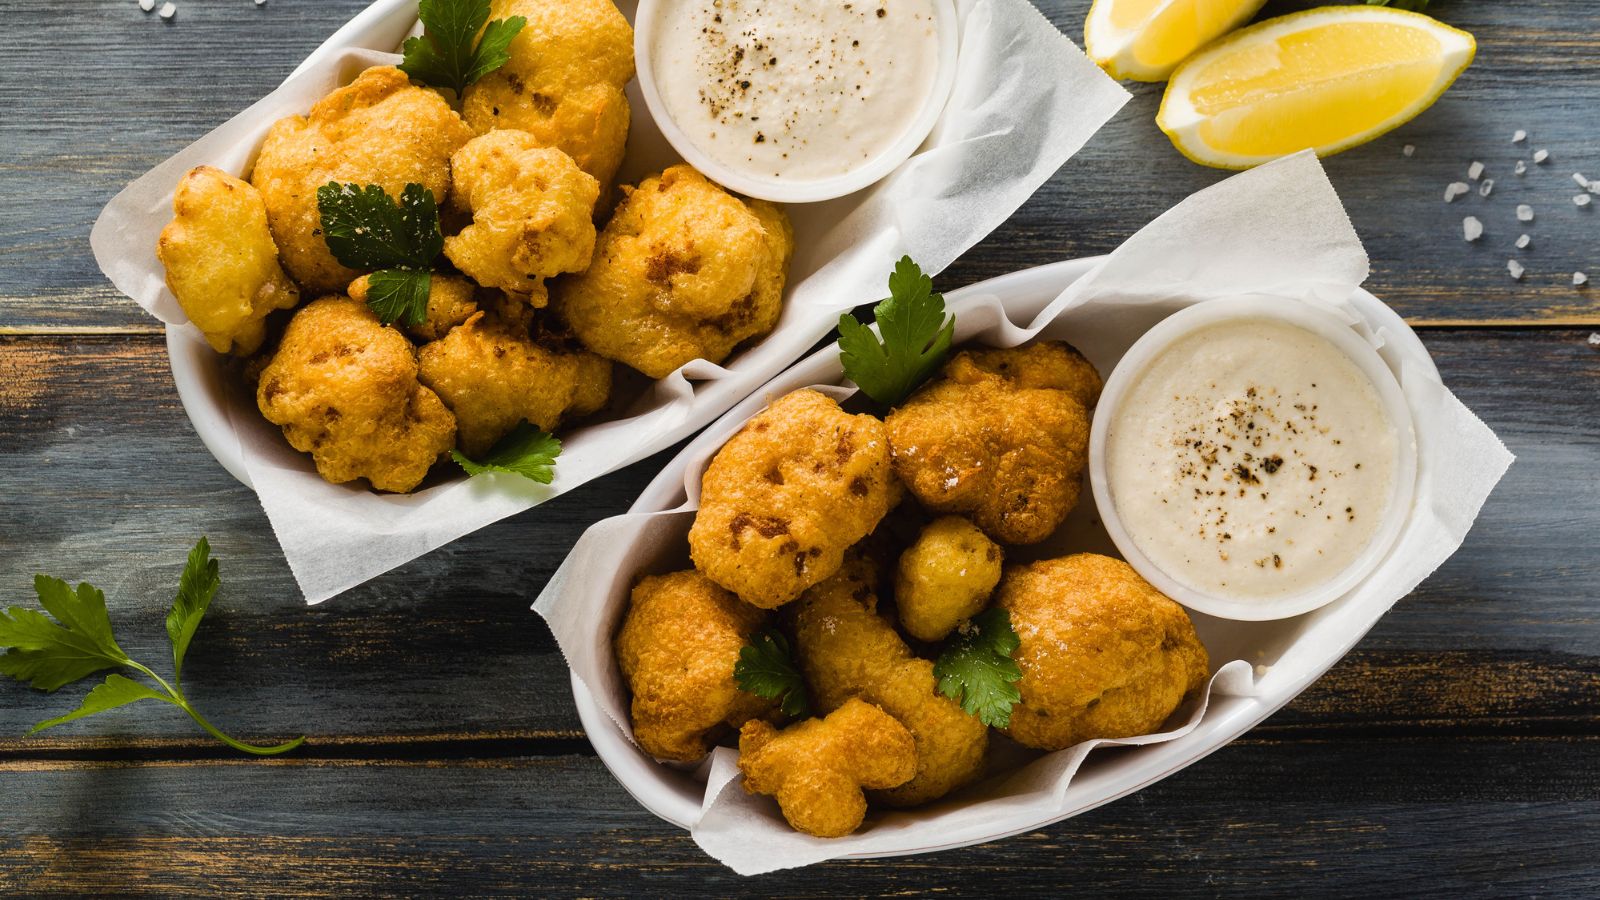 Experience the Wholesome Nutrition Power with these 20 Cauliflower Recipes!